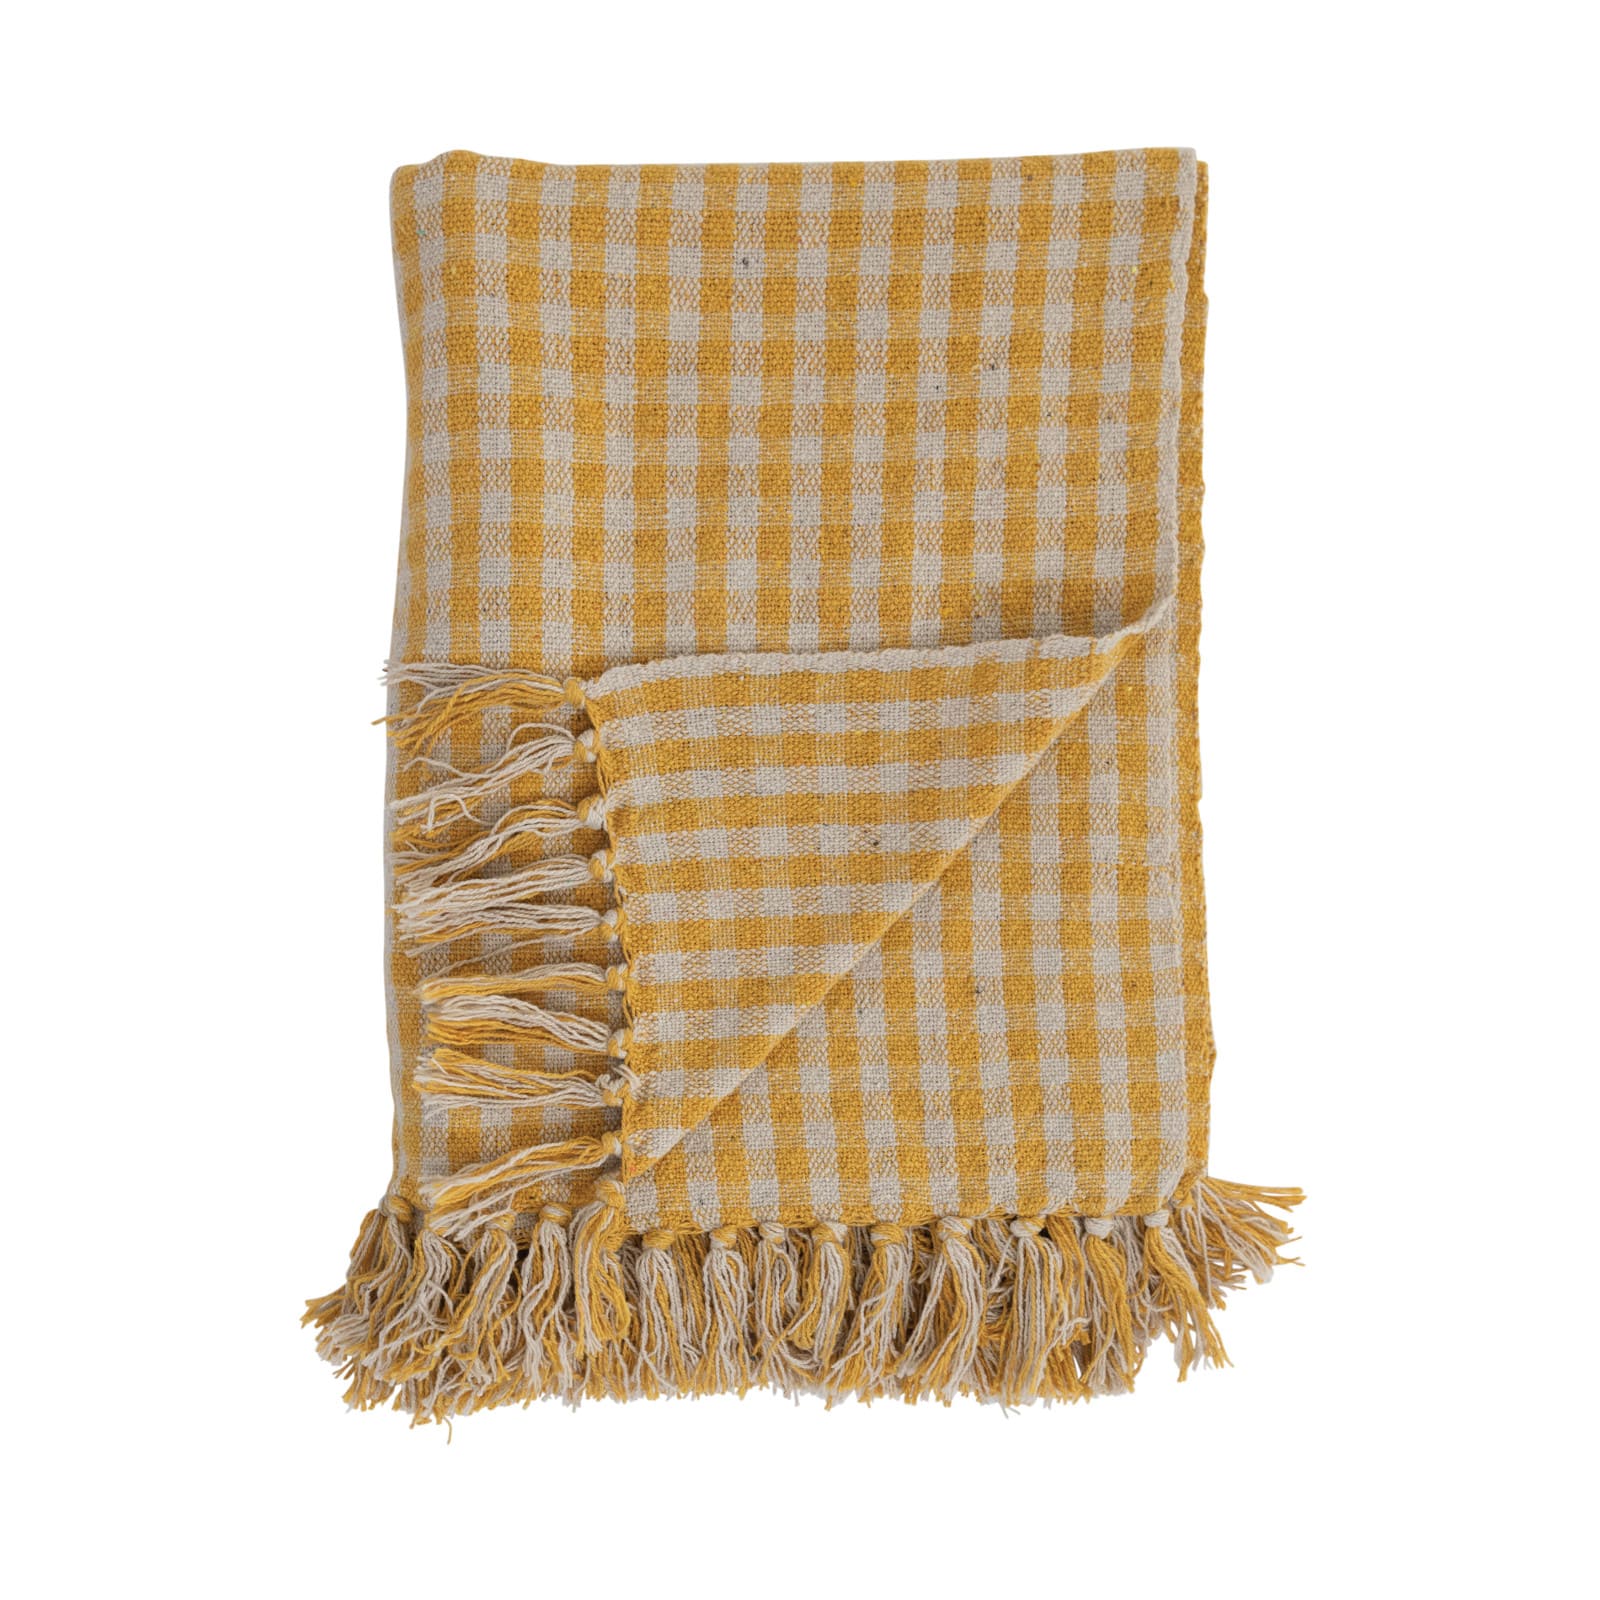 Gingham Woven Recycled Cotton Blend Throw Blanket with Fringe